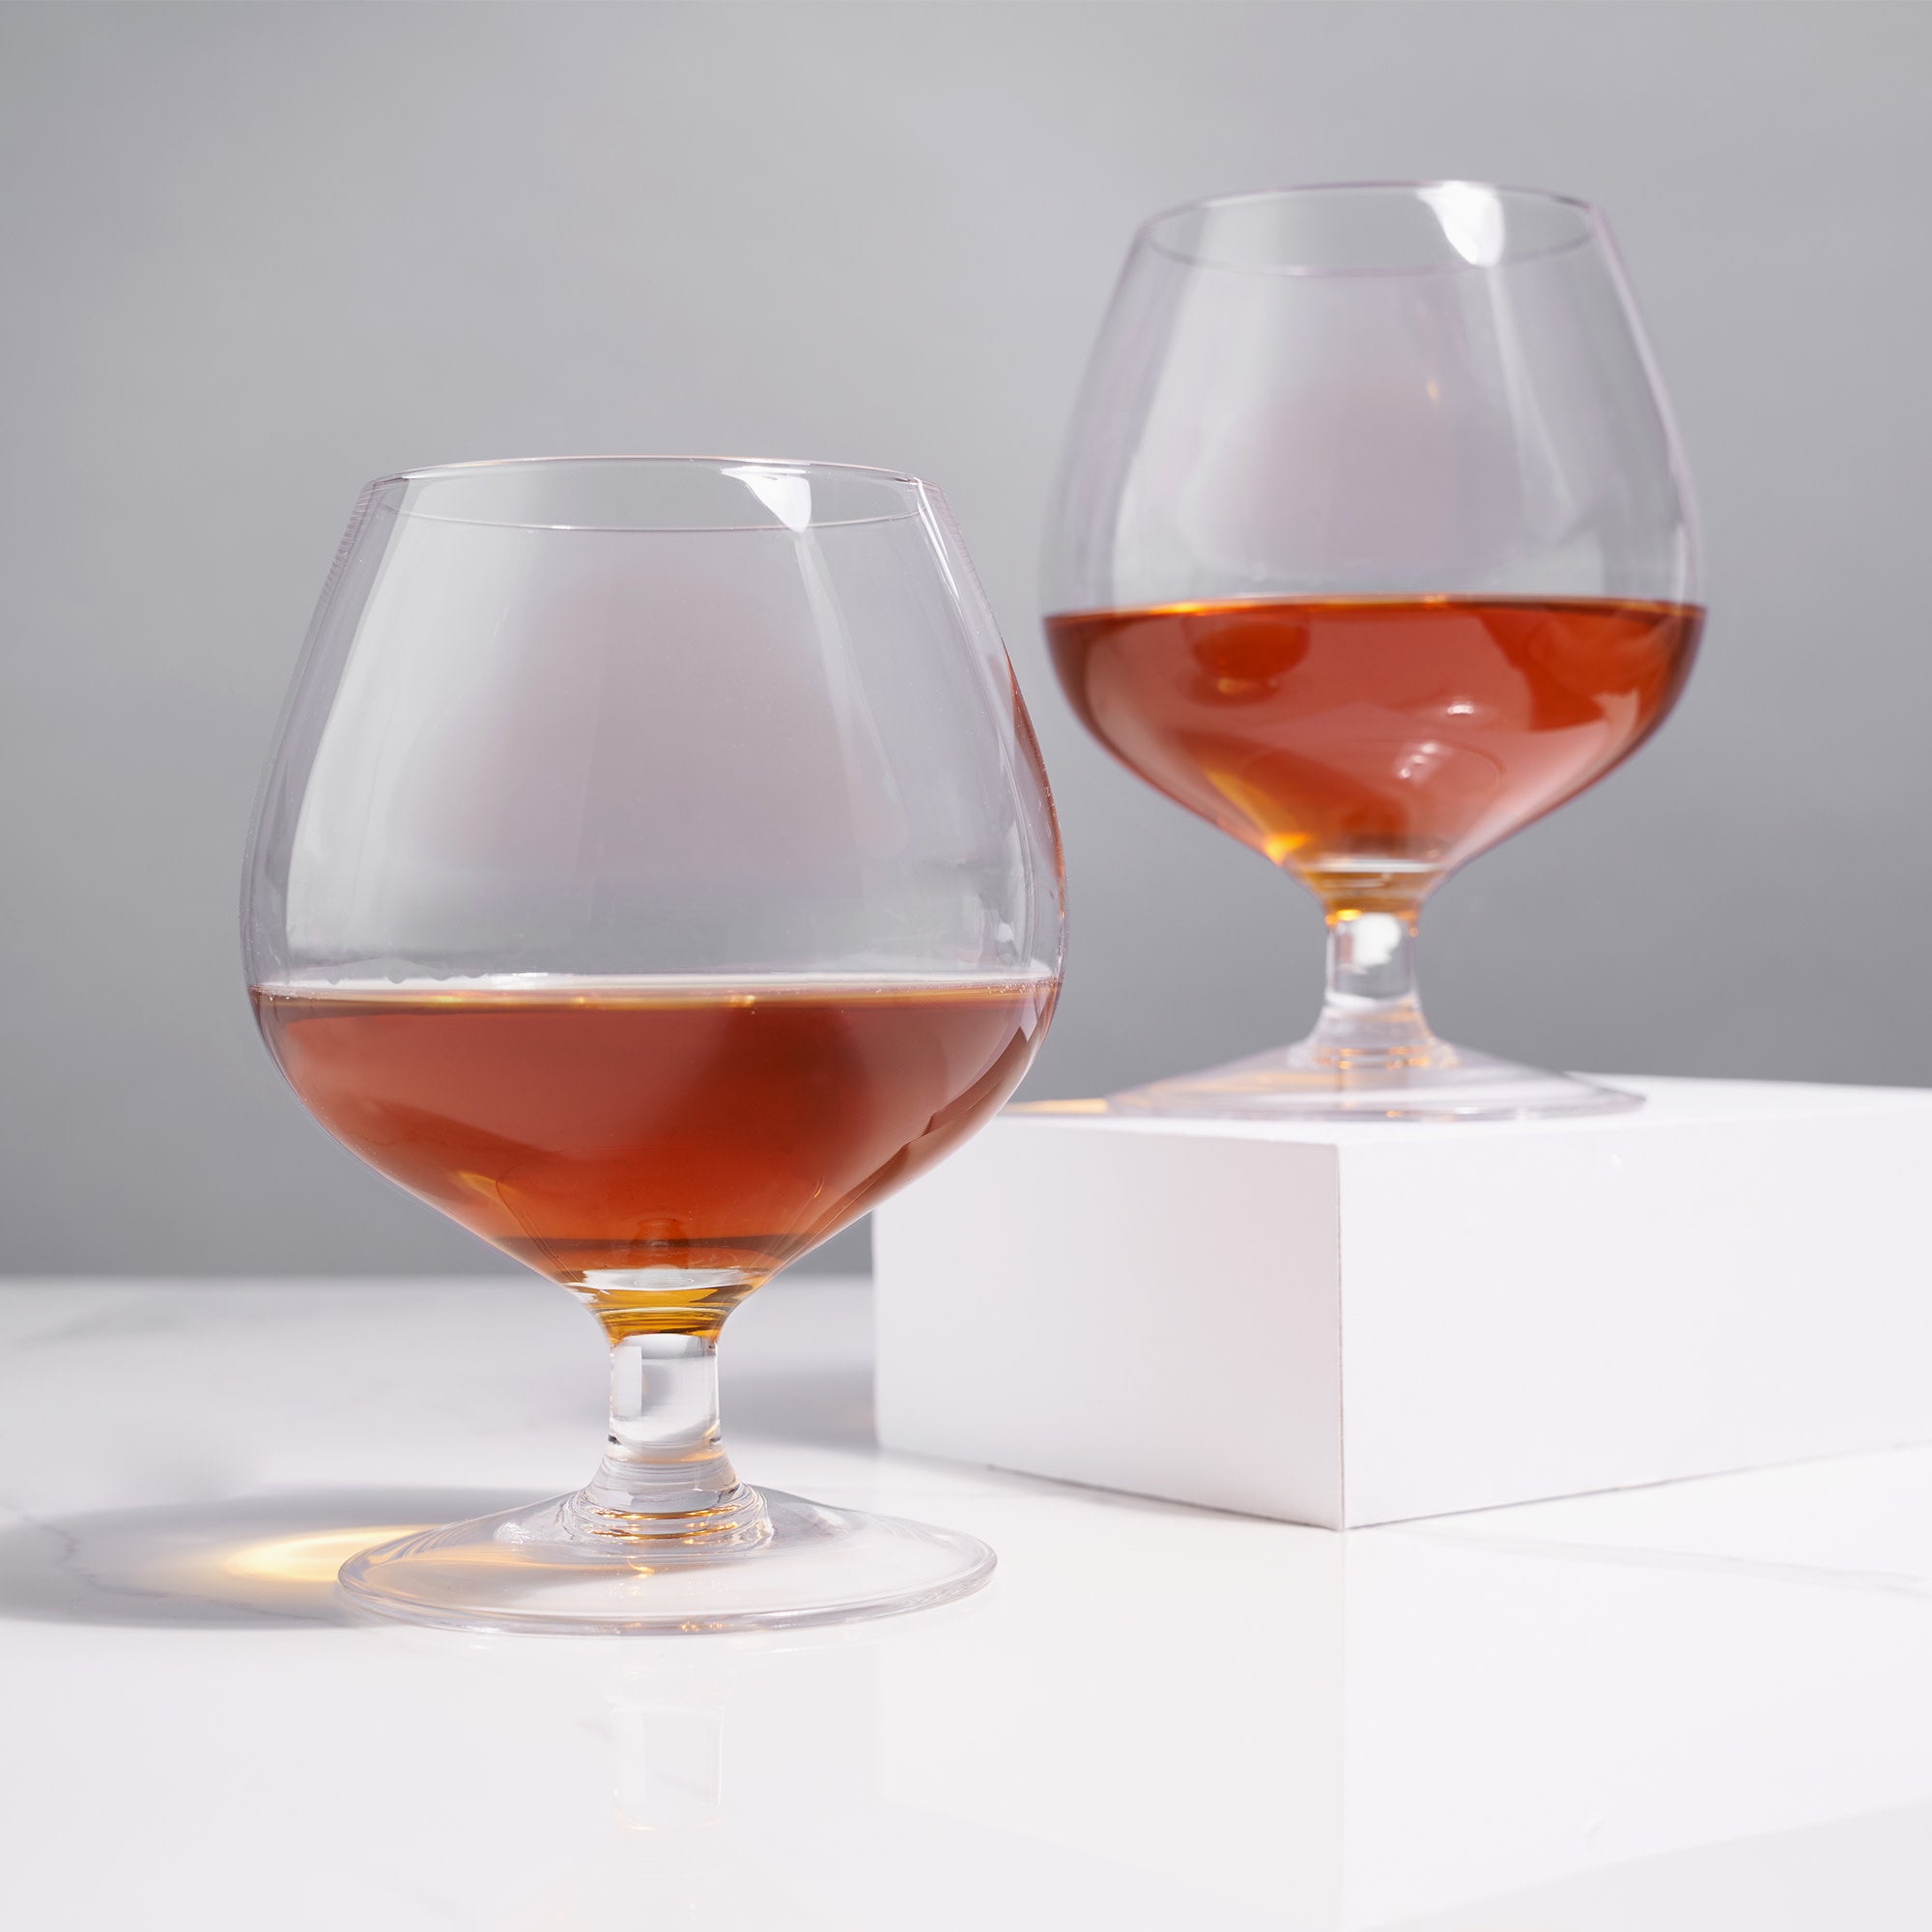 Whiskey Cognac Snifter 2 Pieces - 13.5 Ounce (400 ml) Small Crystal Brandy  Glasses - Good for Bourbon Spirit Beer Drink, BE031, by BothEarn